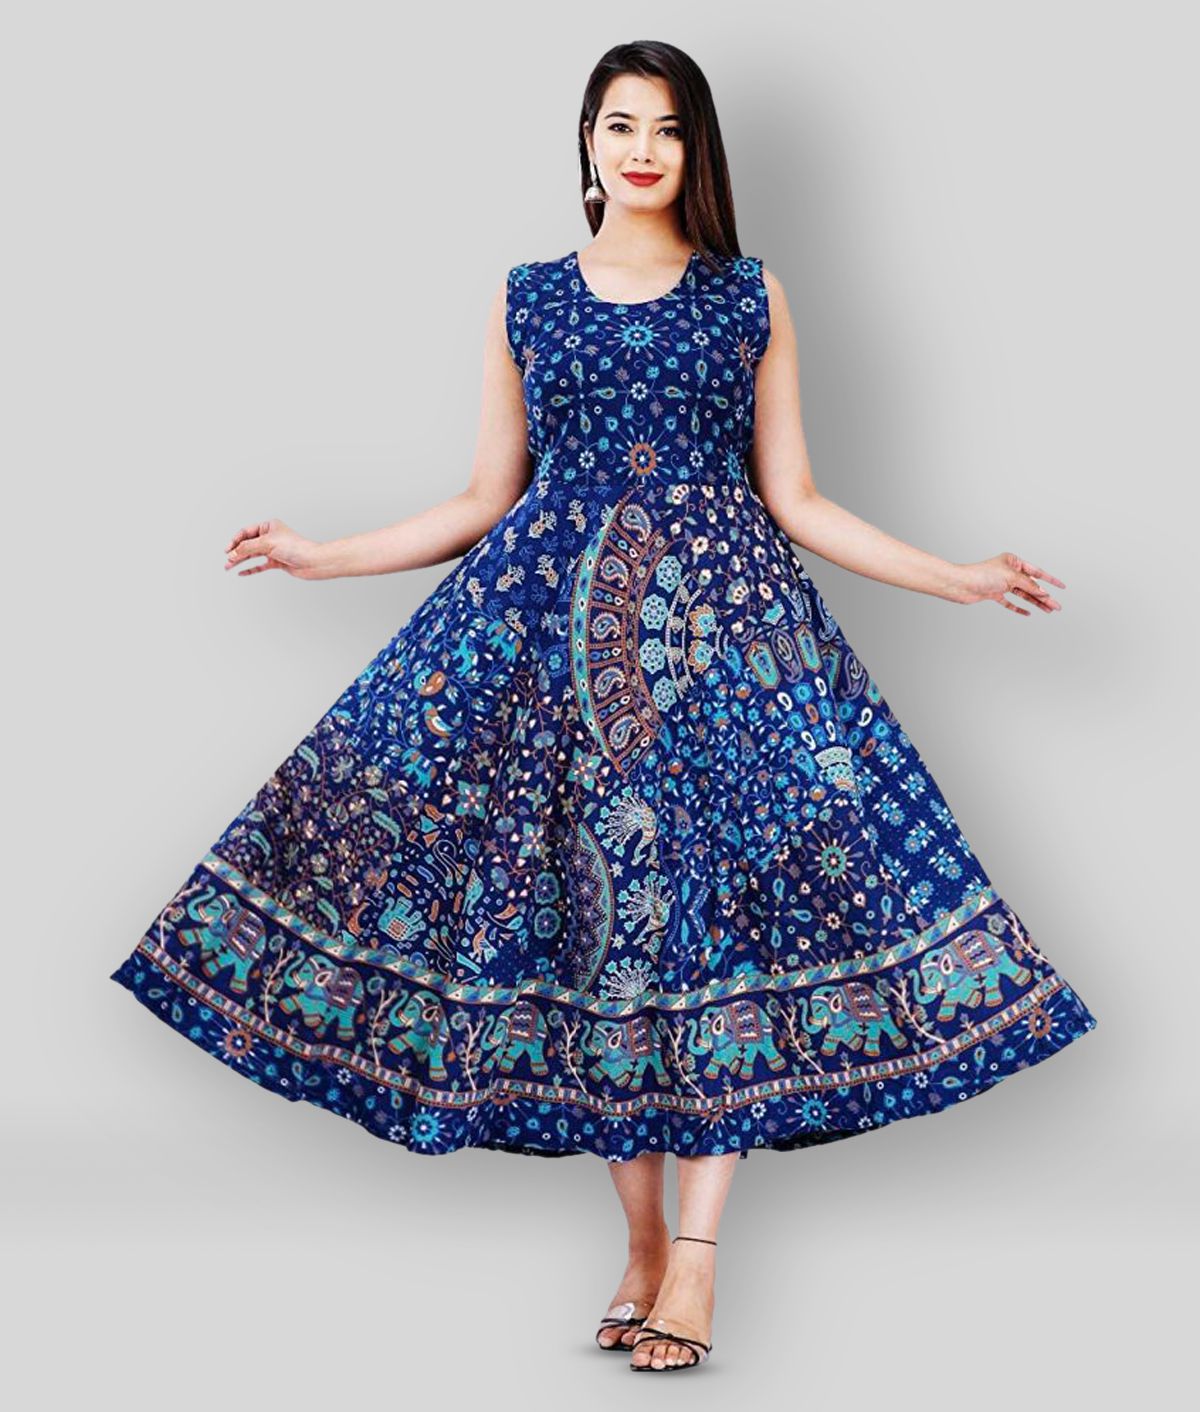     			G4Girl - Blue Anarkali Cotton Women's Stitched Ethnic Gown ( Pack of 1 )